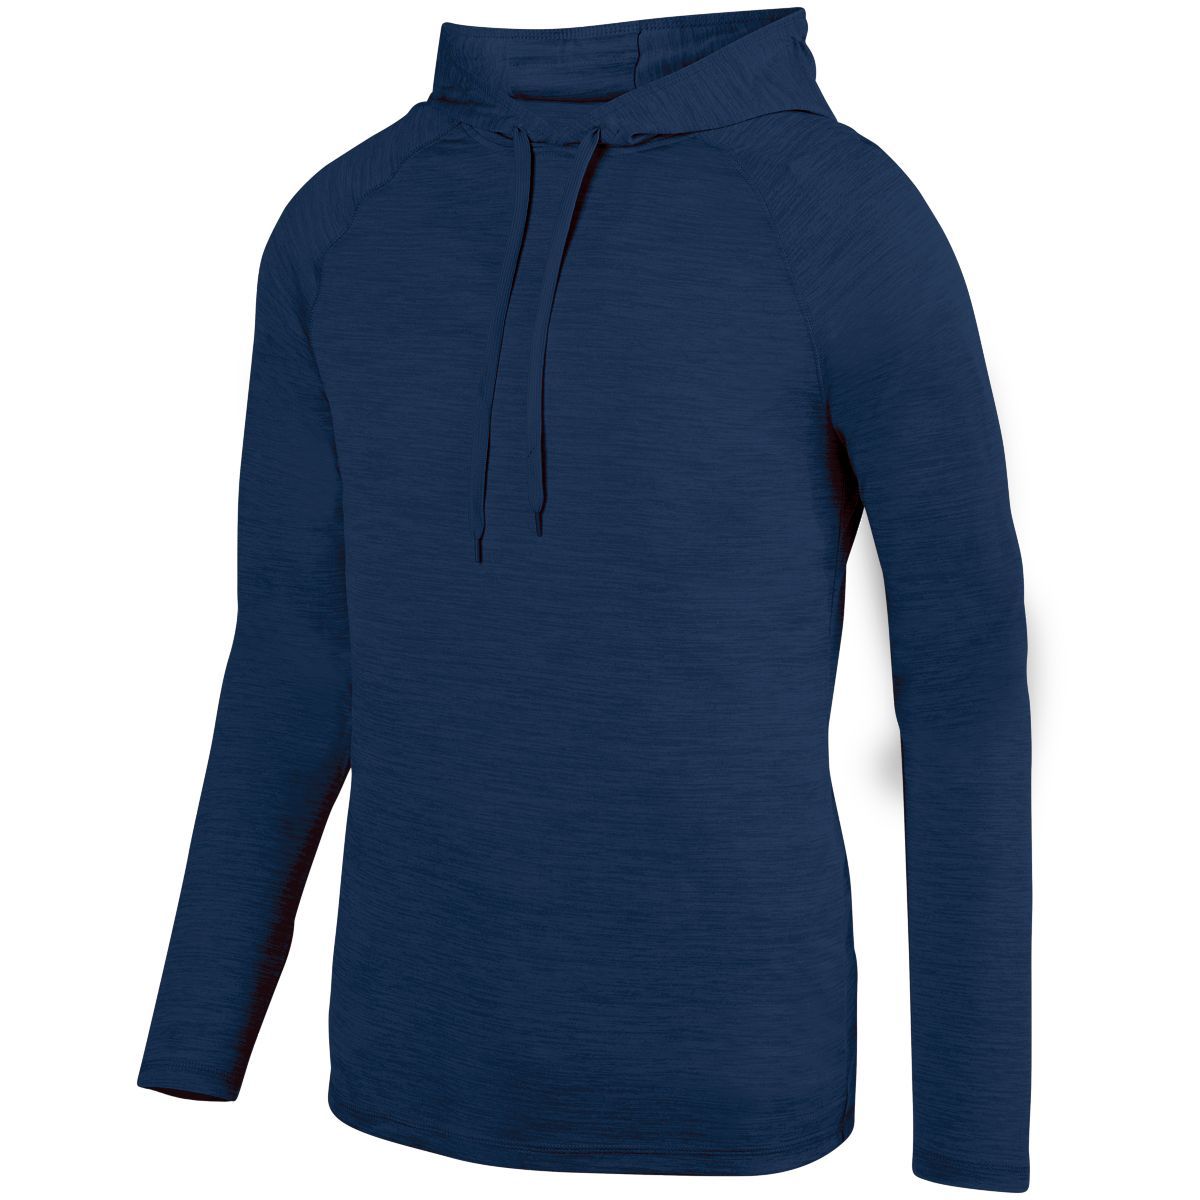 Augusta Sportswear Shadow Tonal Heather Hoodie in Navy  -Part of the Adult, Augusta-Products, Shirts, Tonal-Fleece-Collection product lines at KanaleyCreations.com